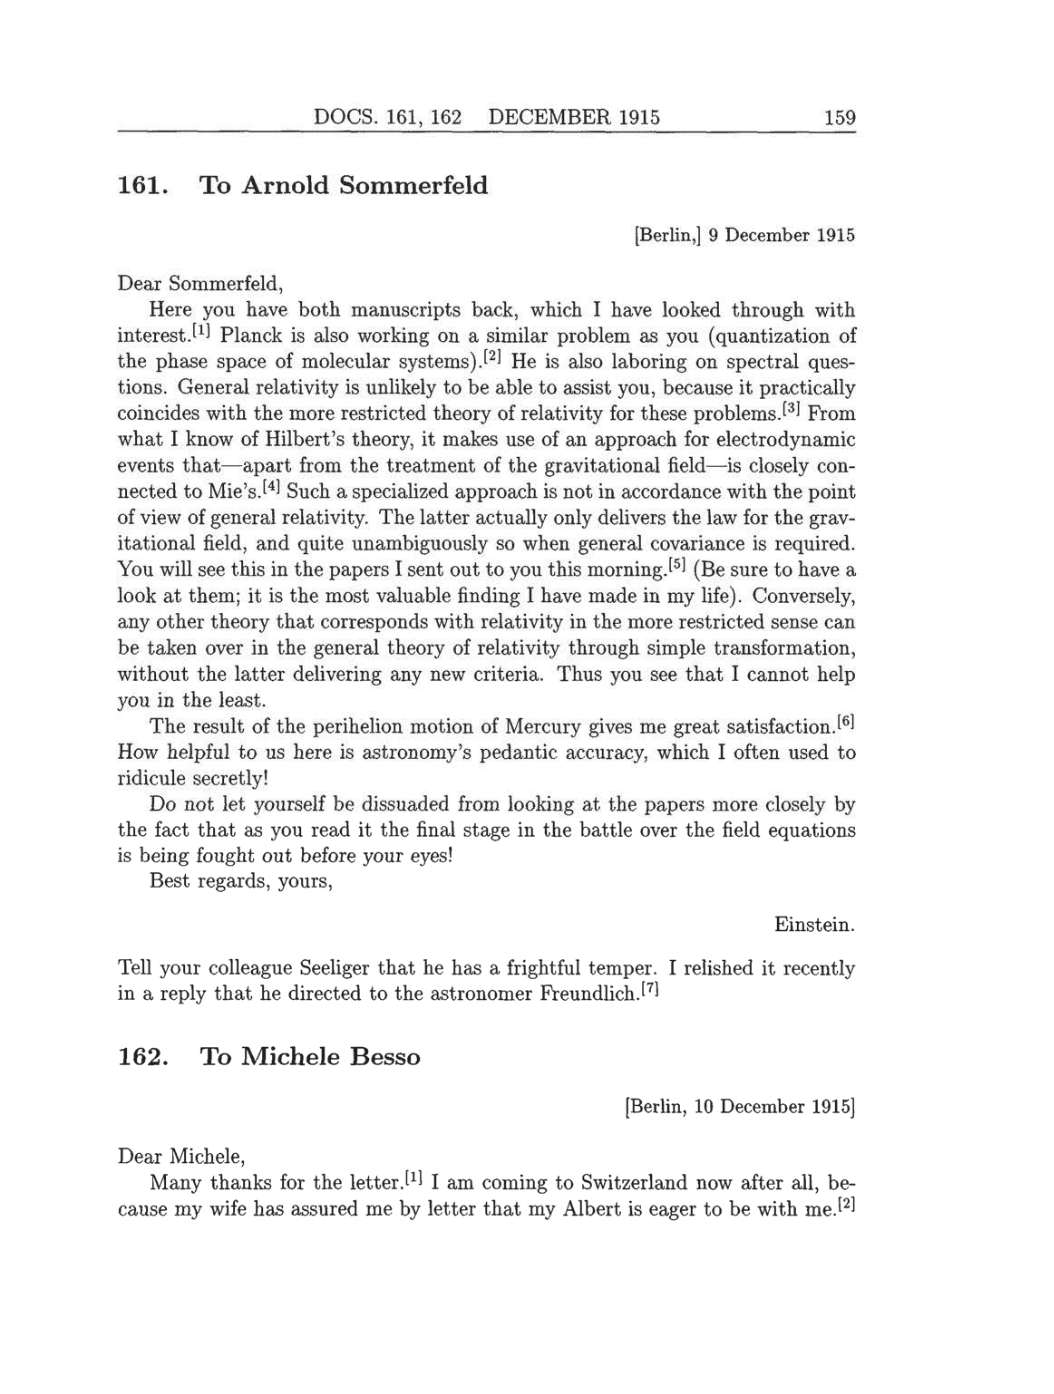 Volume 8: The Berlin Years: Correspondence, 1914-1918 (English translation supplement) page 159